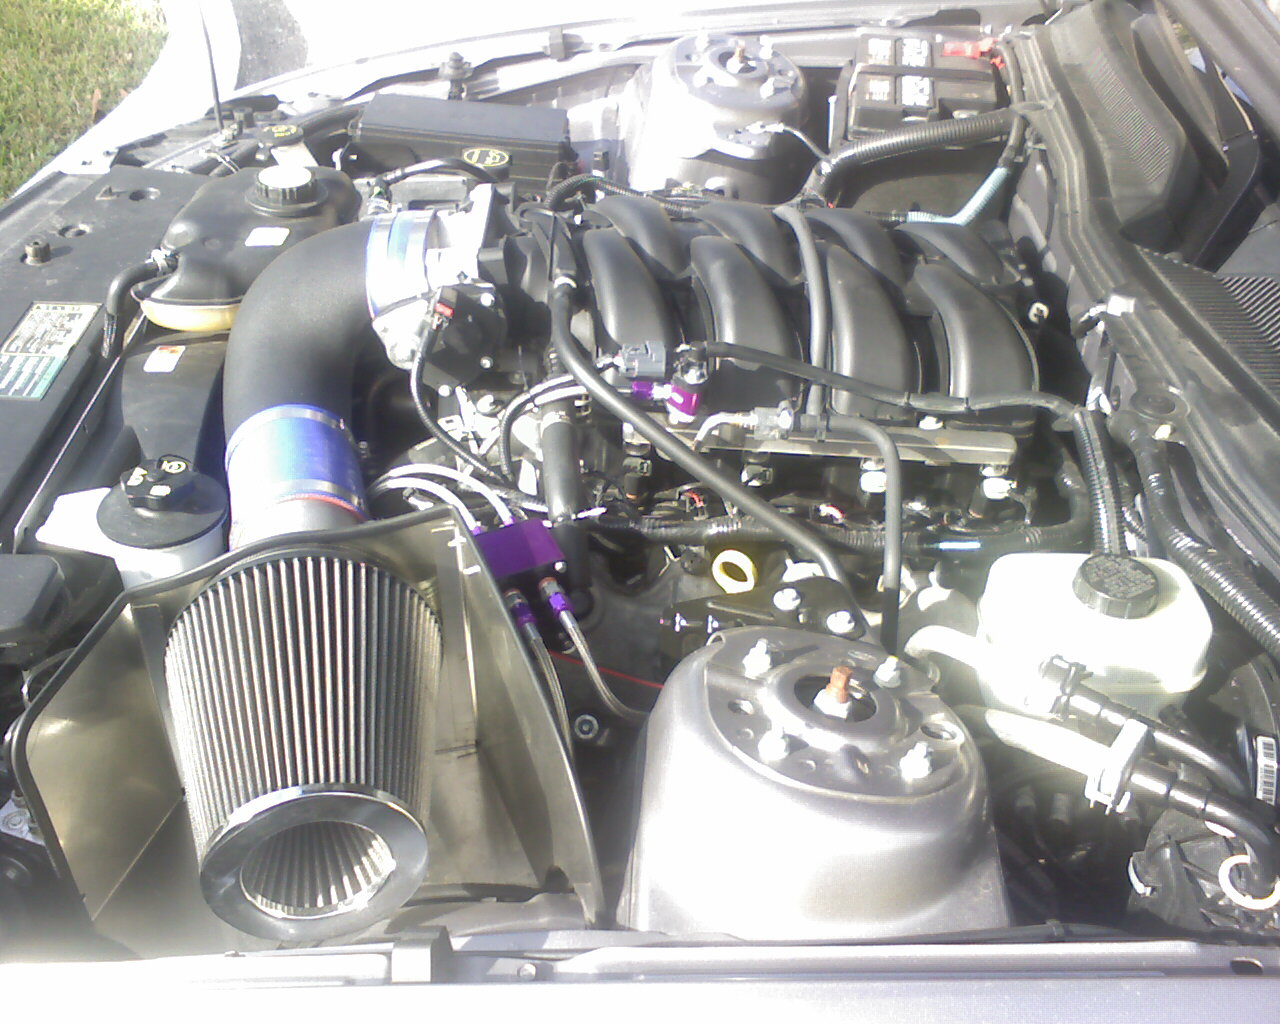  2006 Ford Mustang GT Nitrous